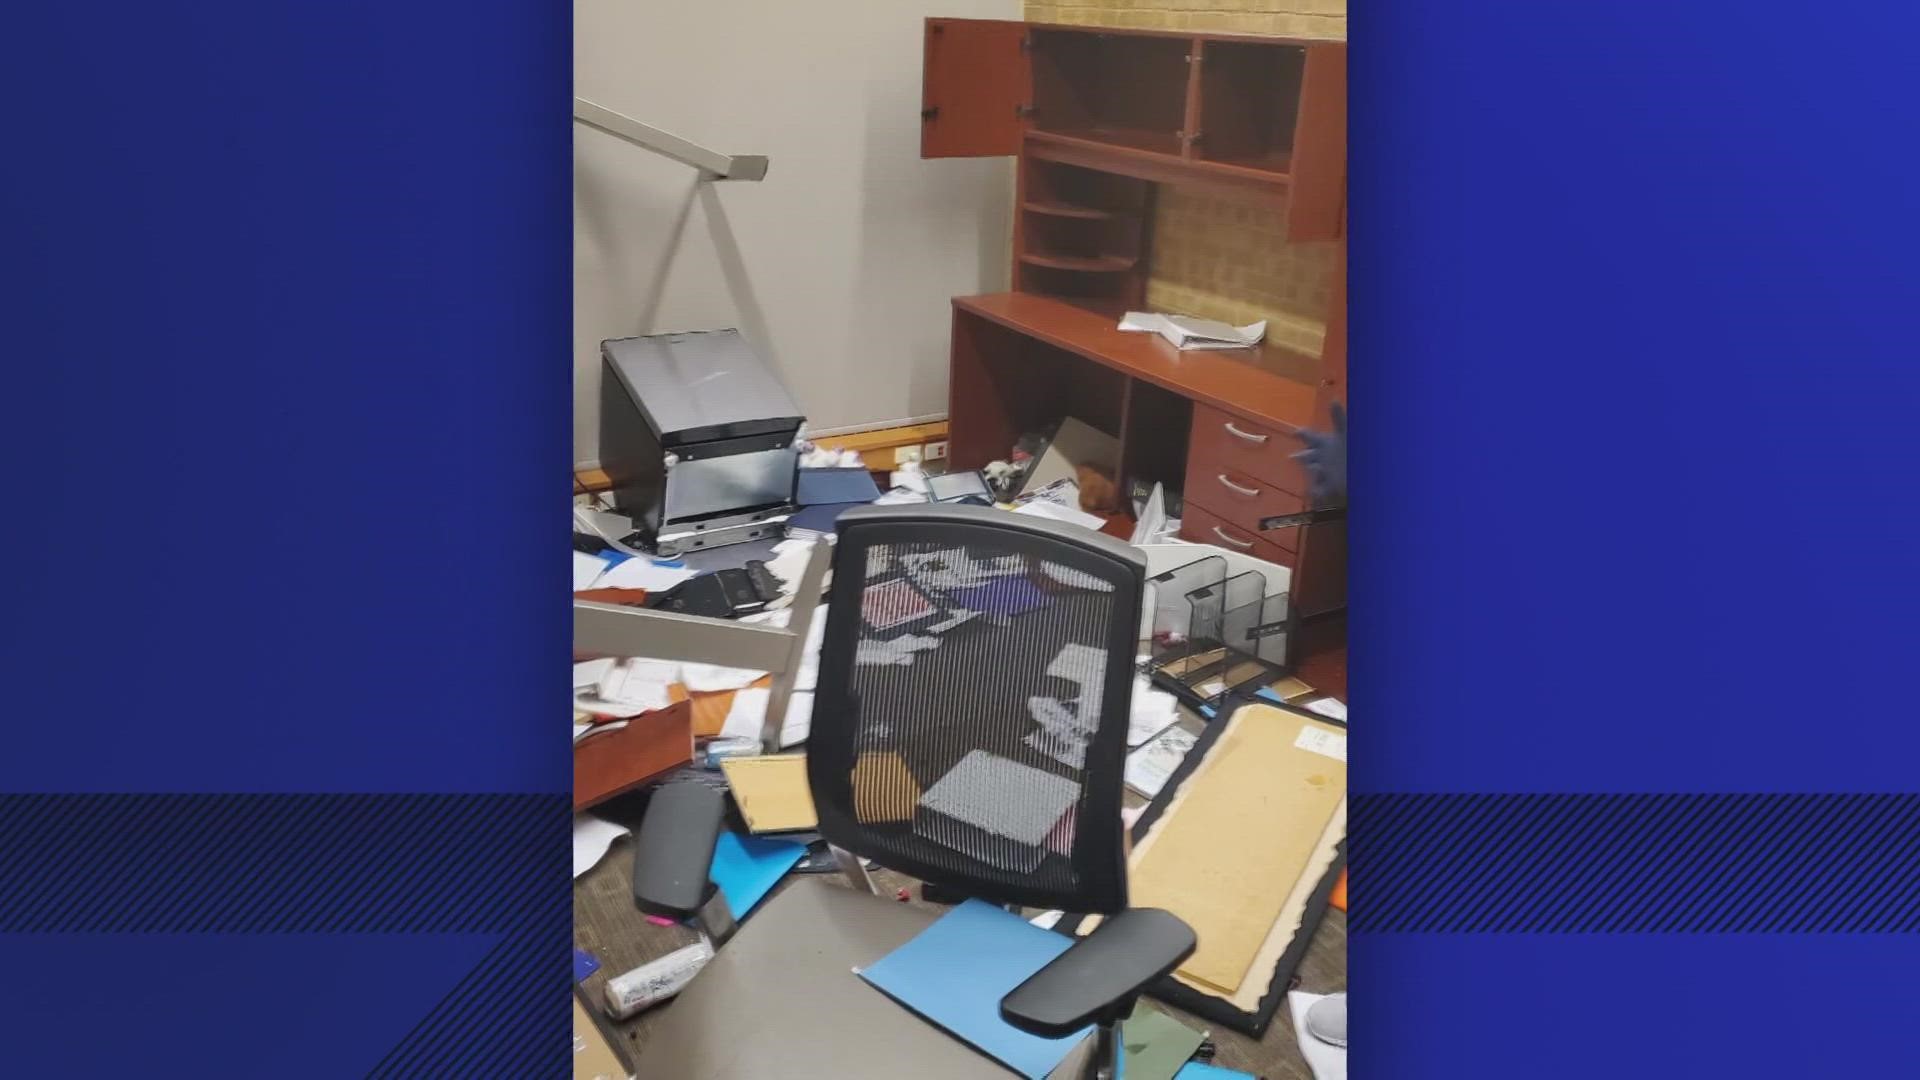 One police officer described the City Manager's office as suffering "total destruction."